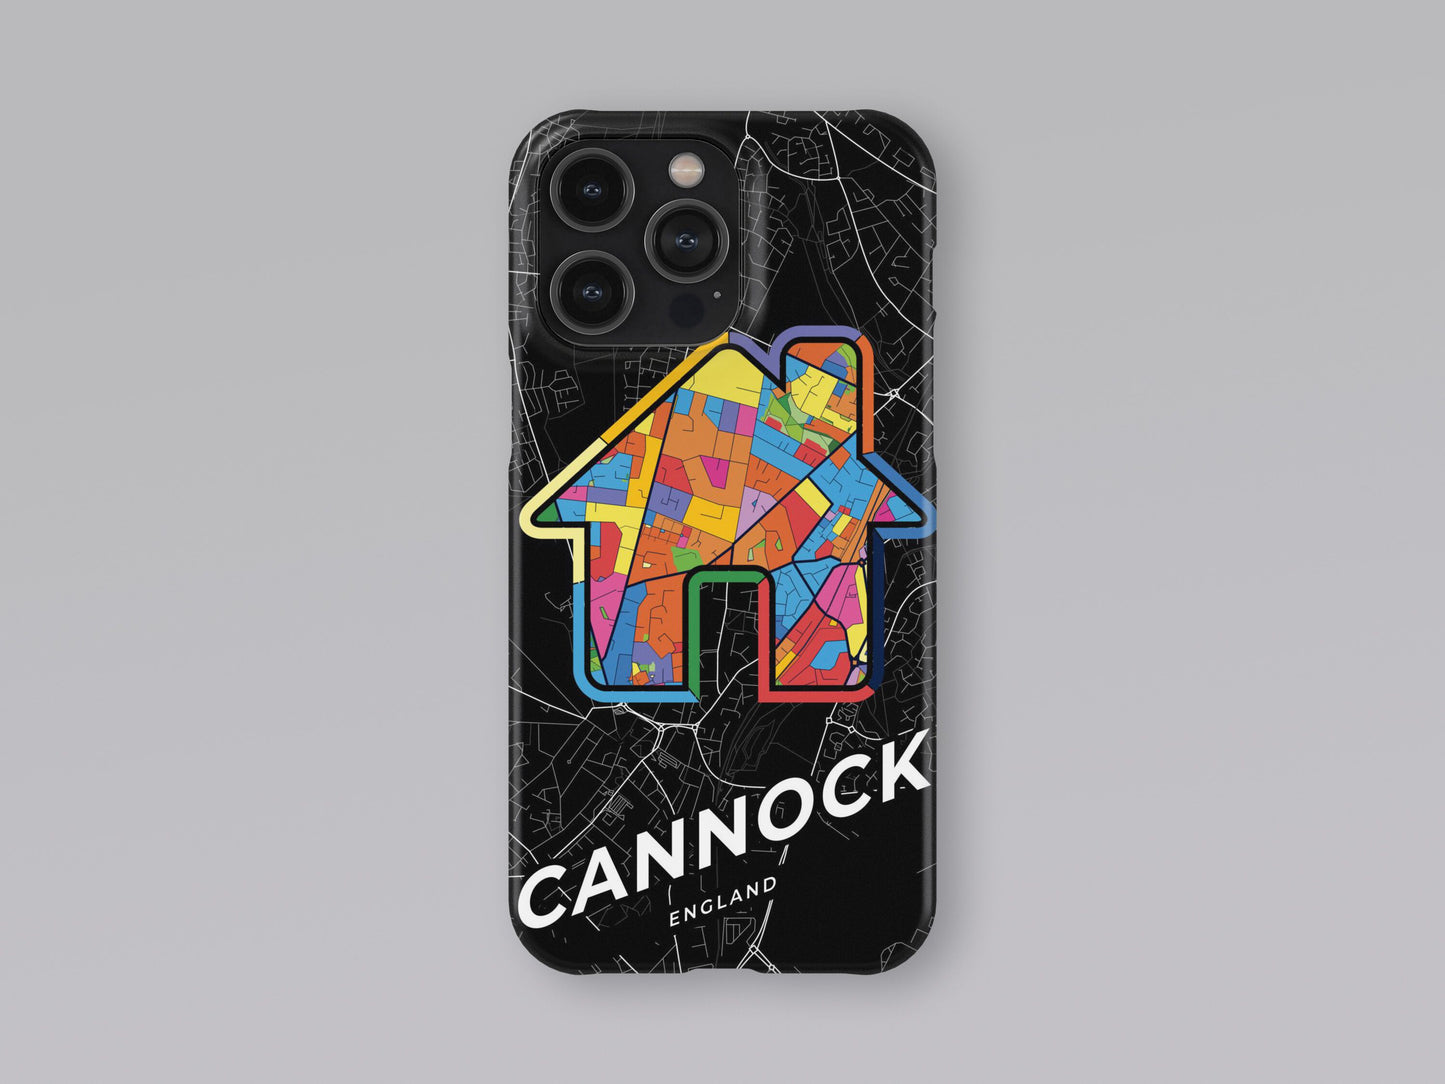 Cannock England slim phone case with colorful icon. Birthday, wedding or housewarming gift. Couple match cases. 3